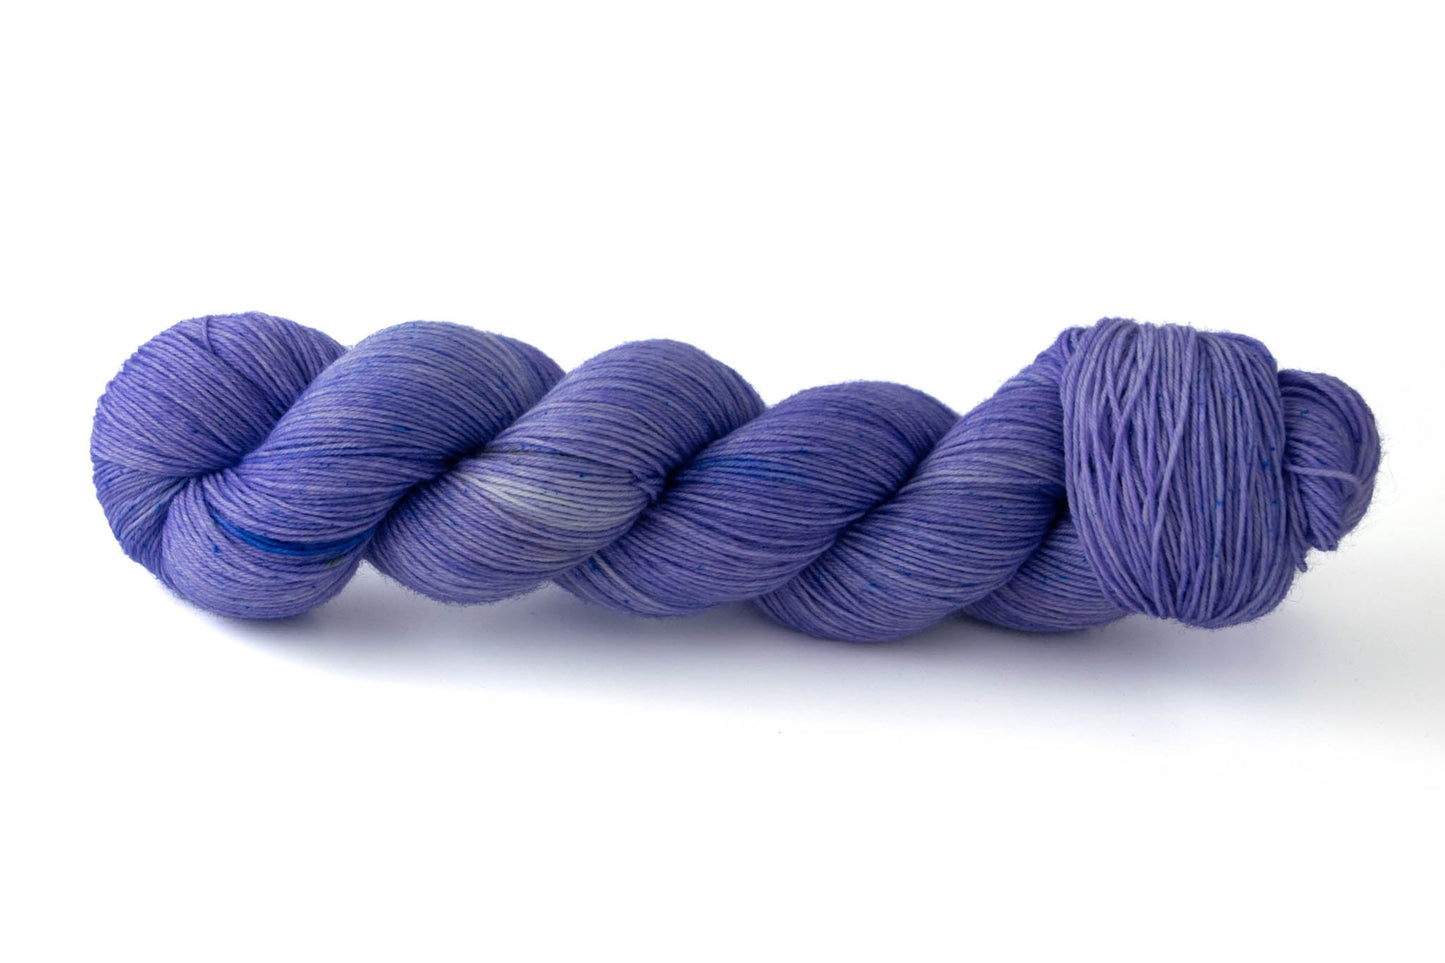 A skein of neon lilac hand-dyed wool yarn.